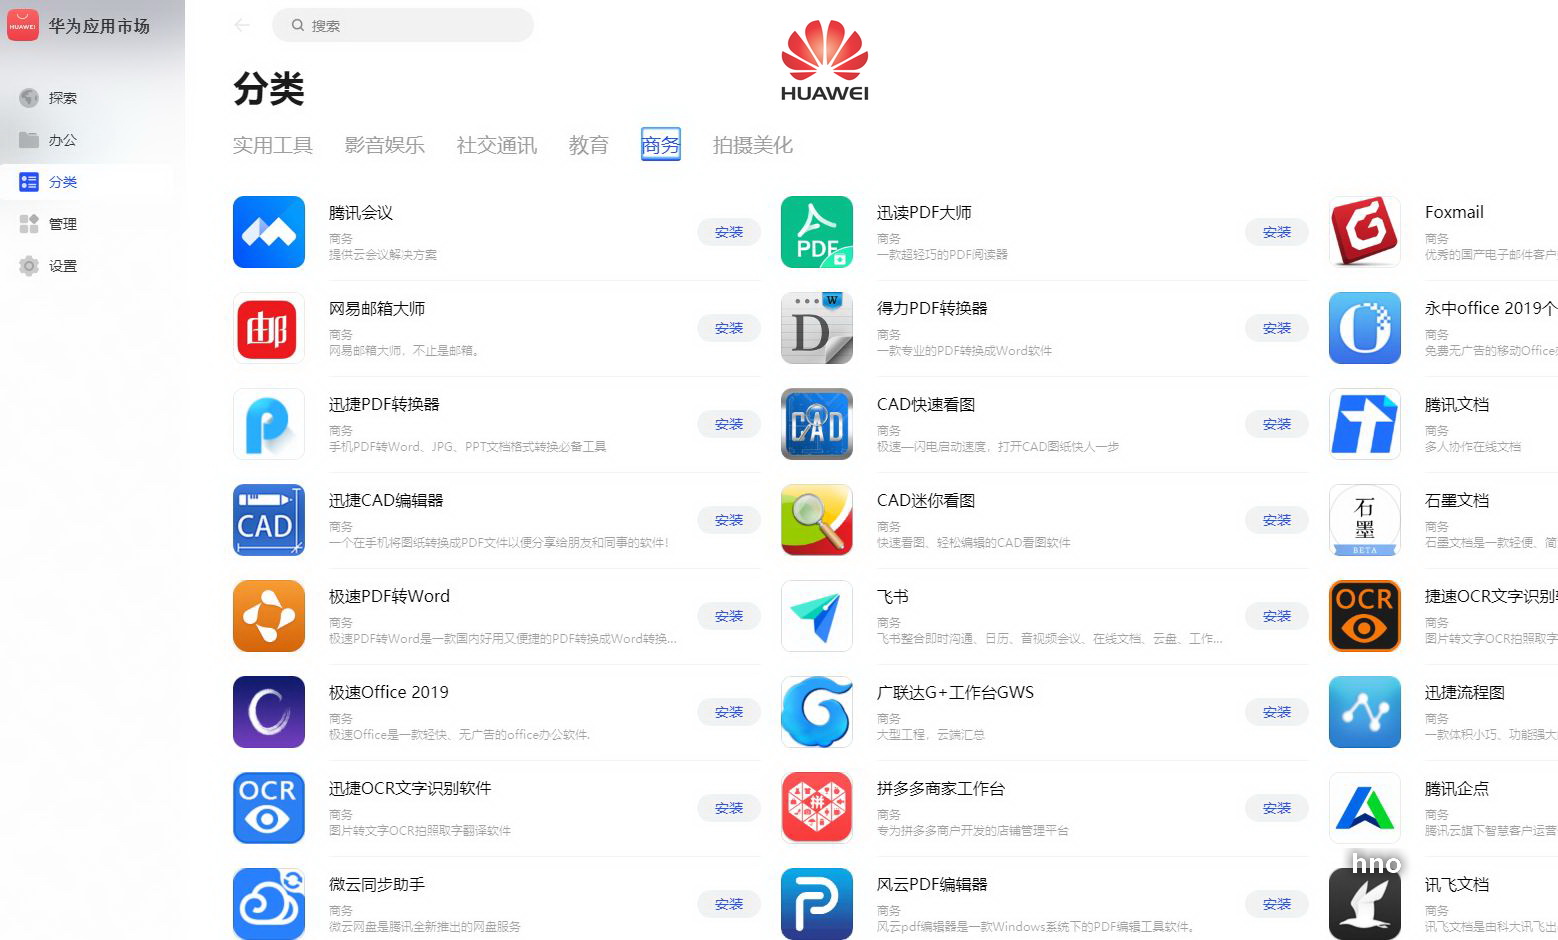 Huawei AppGallery Application Market PC version download